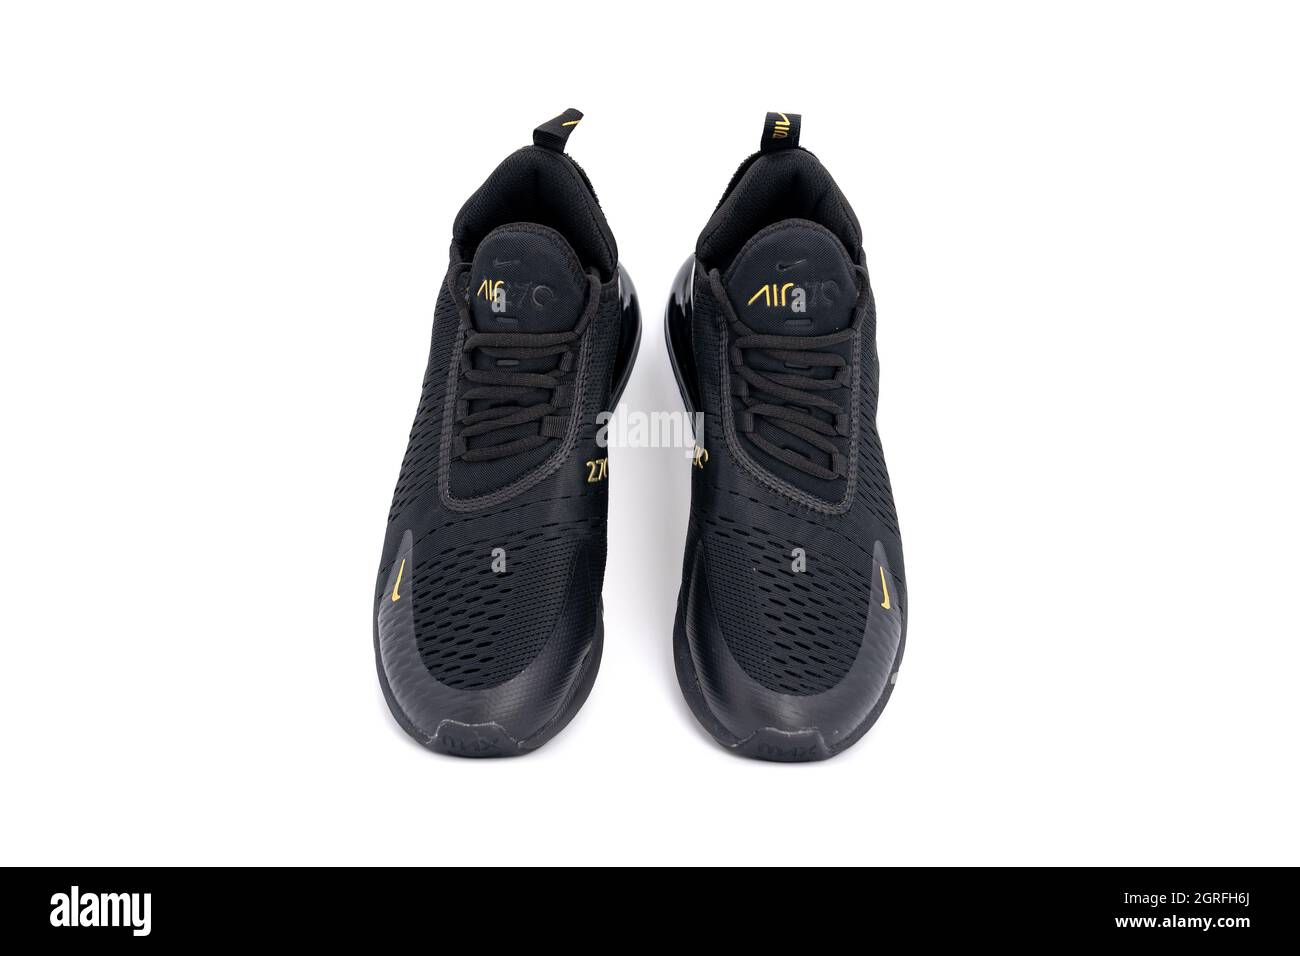 Bangkok, Thailand - 23 Mar 2020, Nike air max 270 black and gold adult's  sport shoes, sneakers, trainers detailed close up shot on studio light  white Stock Photo - Alamy